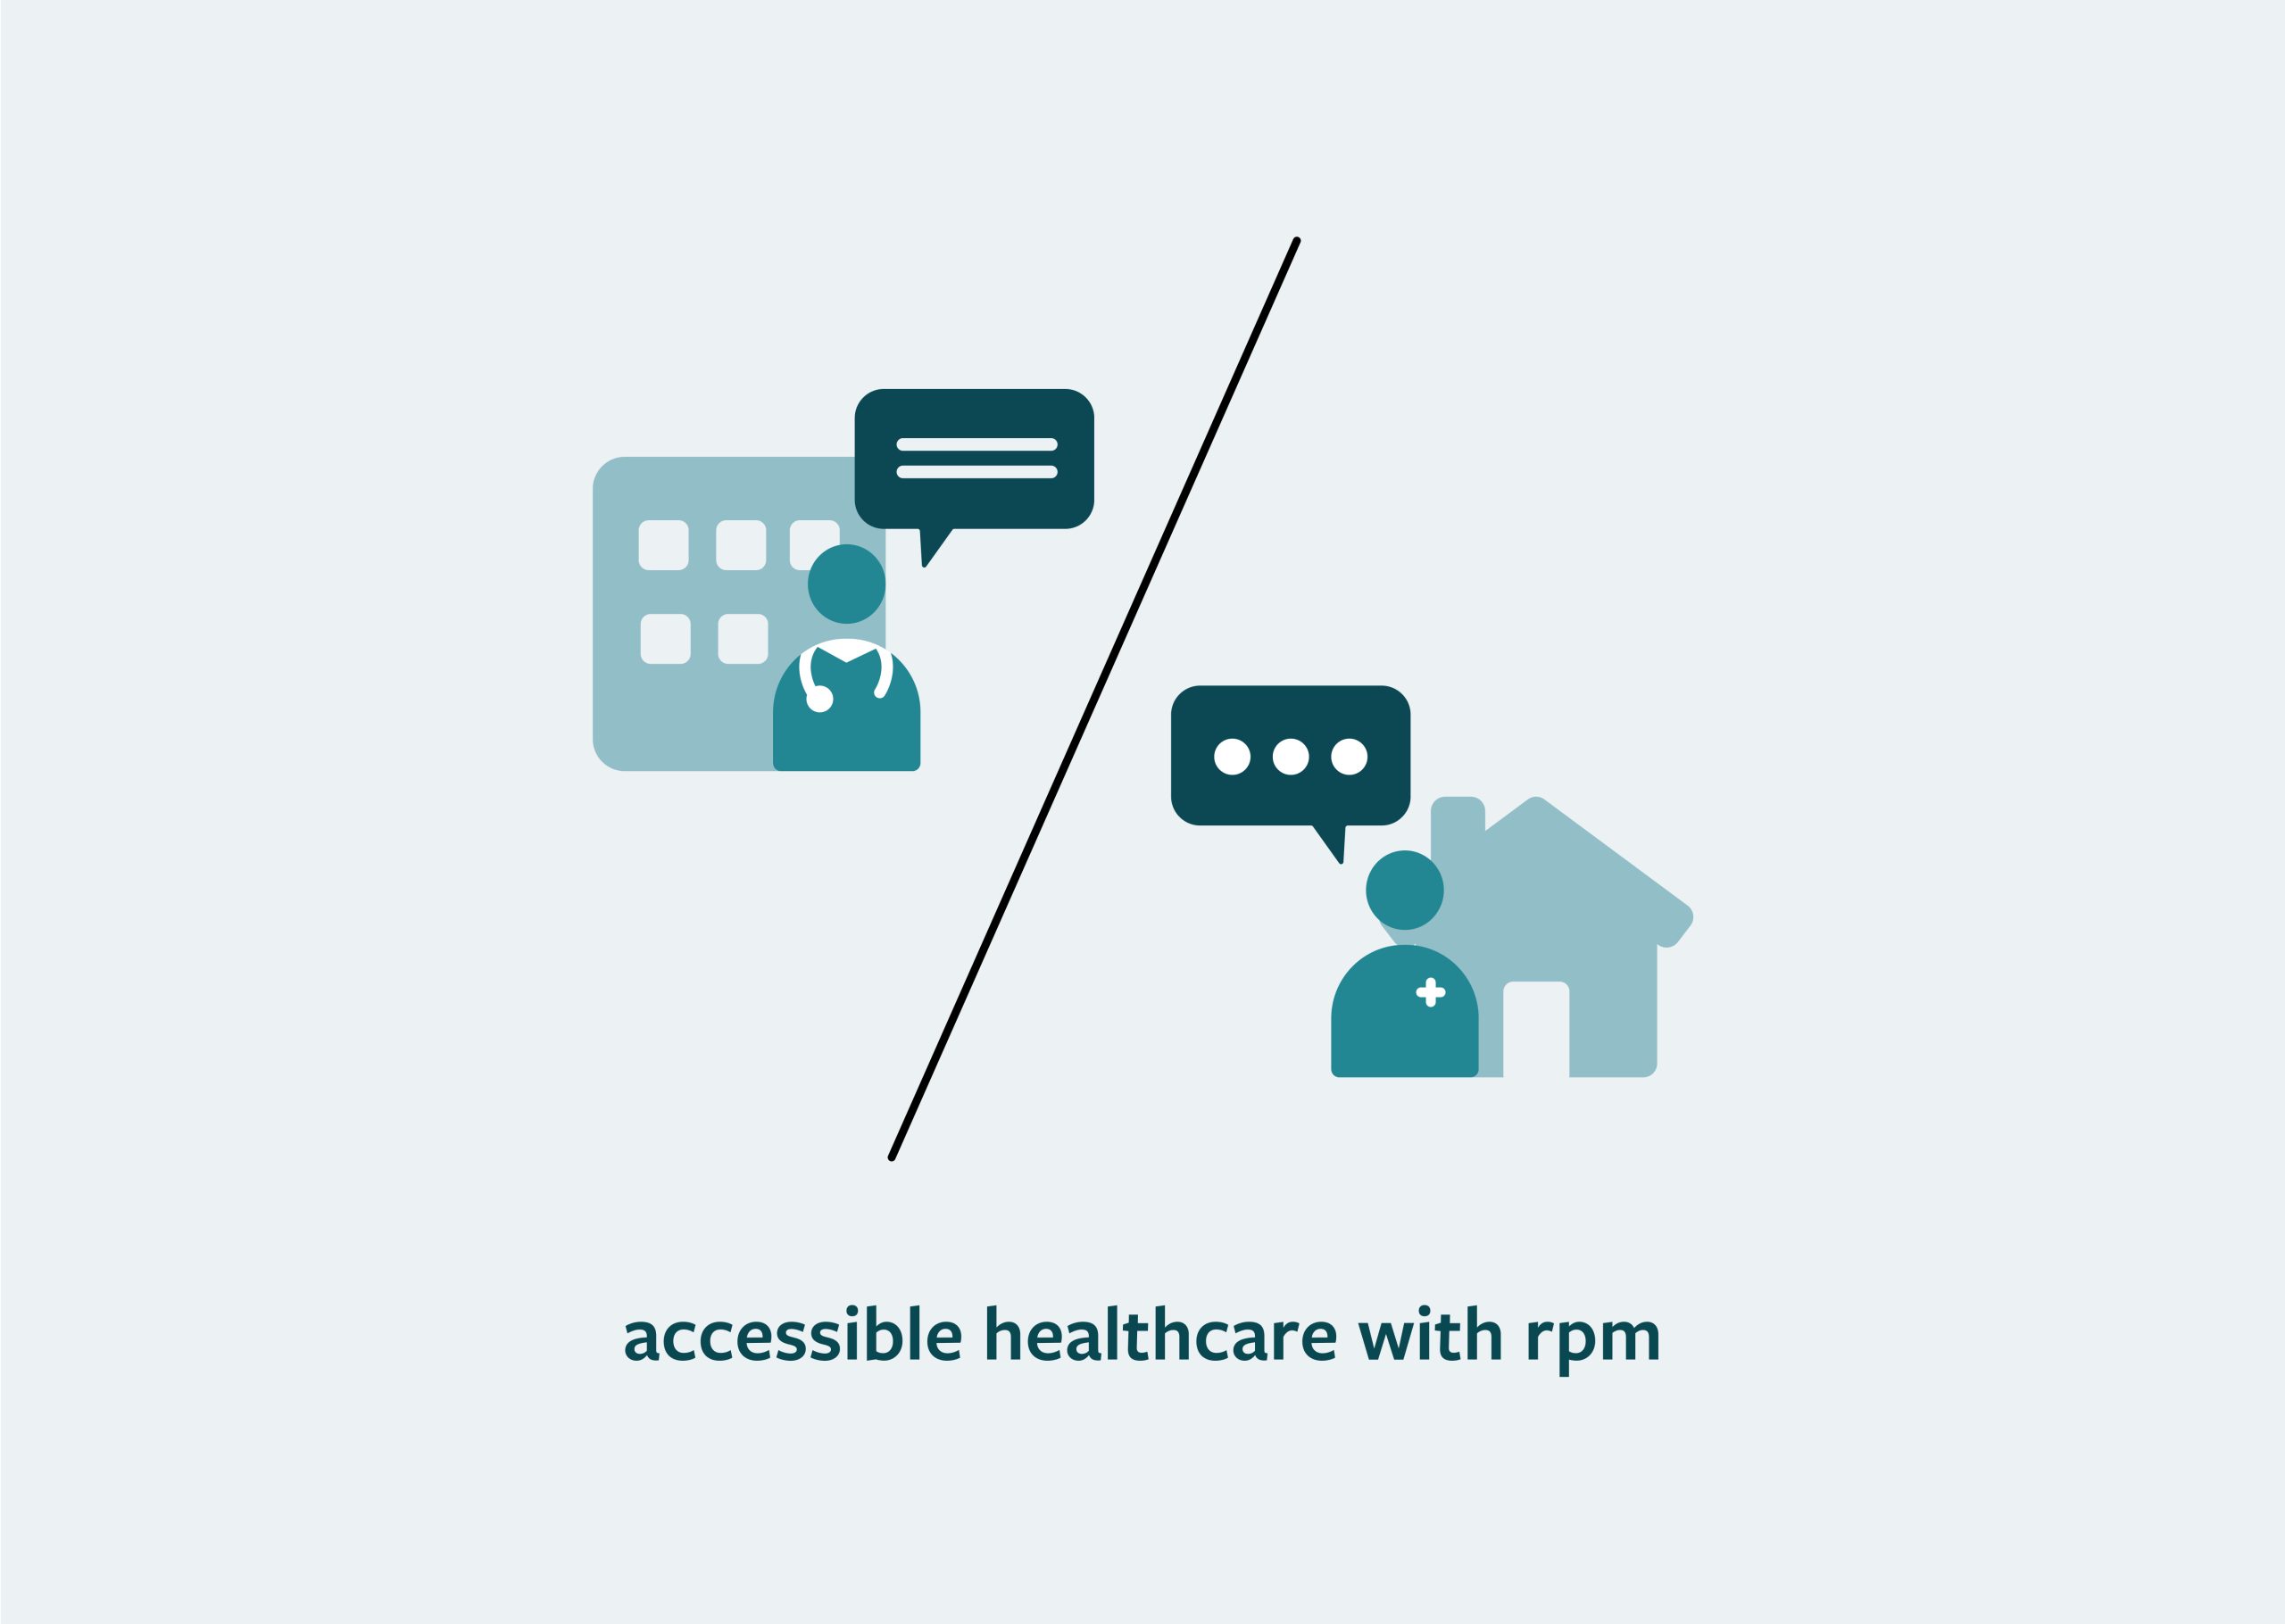 Healthcare accessibility